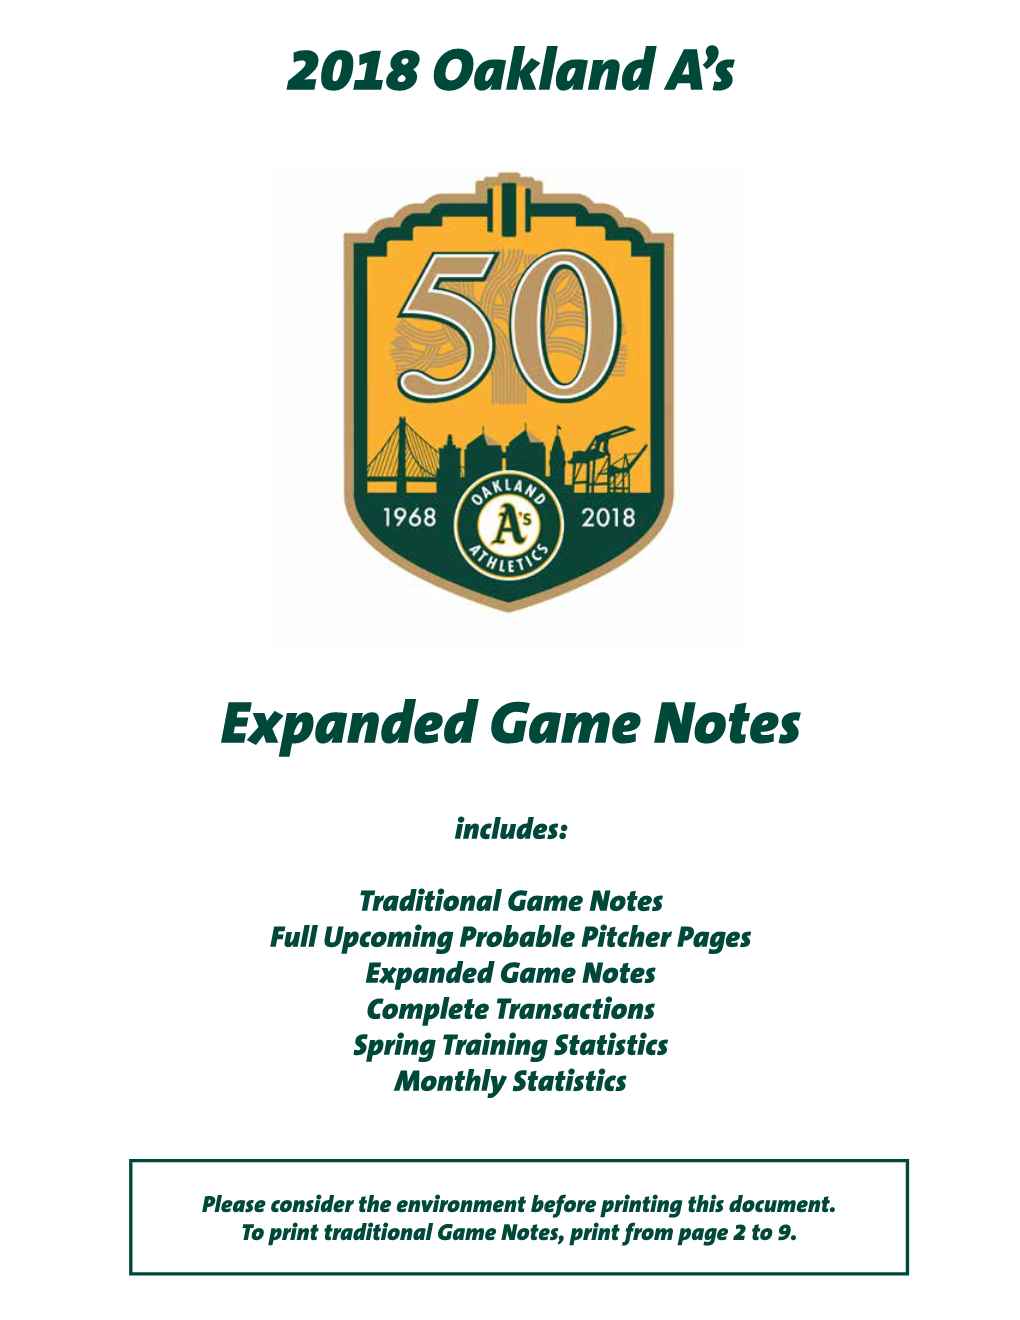 2018 Oakland A's Expanded Game Notes